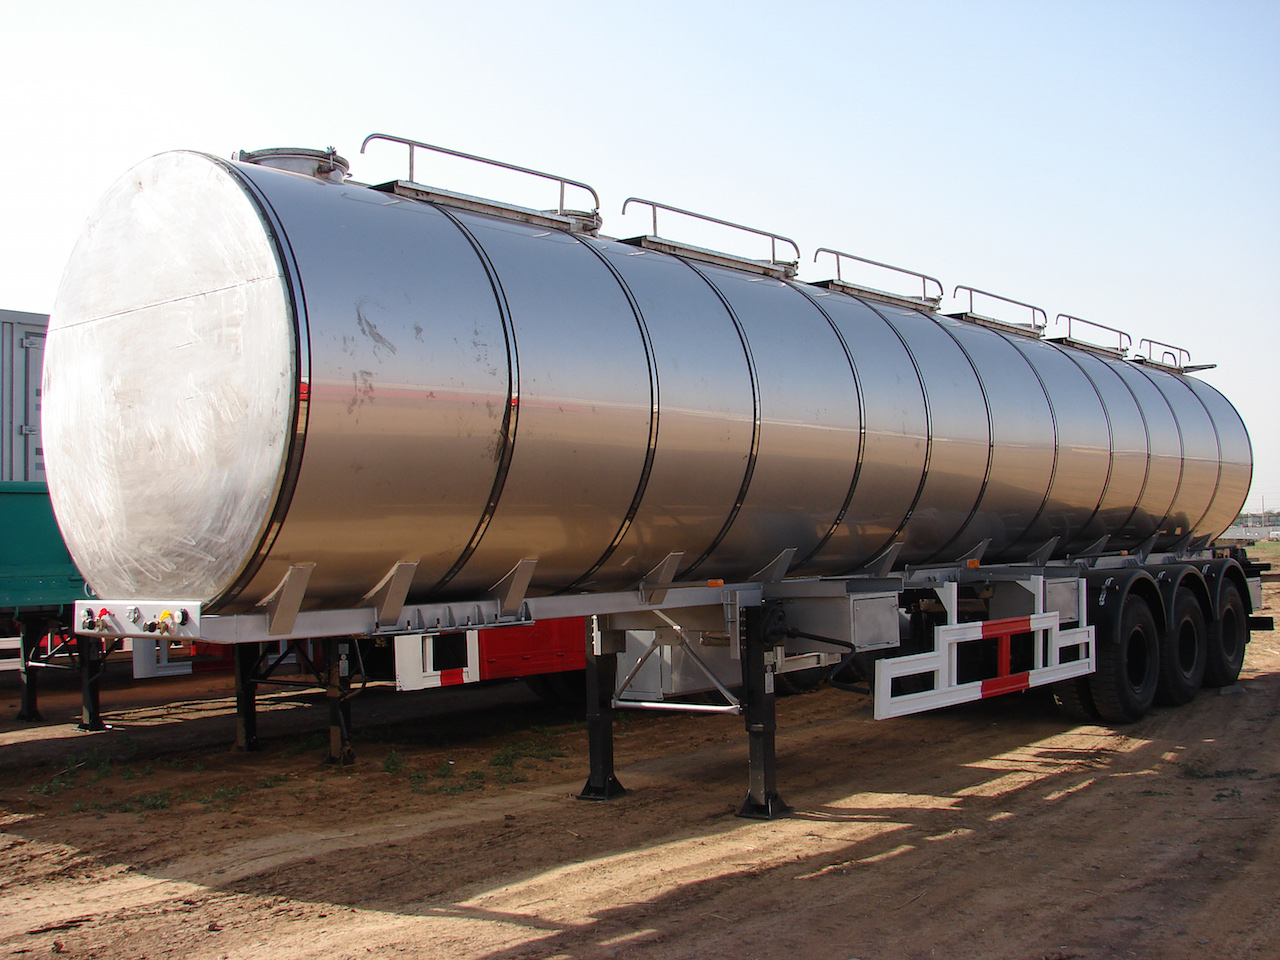 40000L Stainless Steel Insulated Tanker Semi-Trailer with 3 BPW Axles for Ice Cream